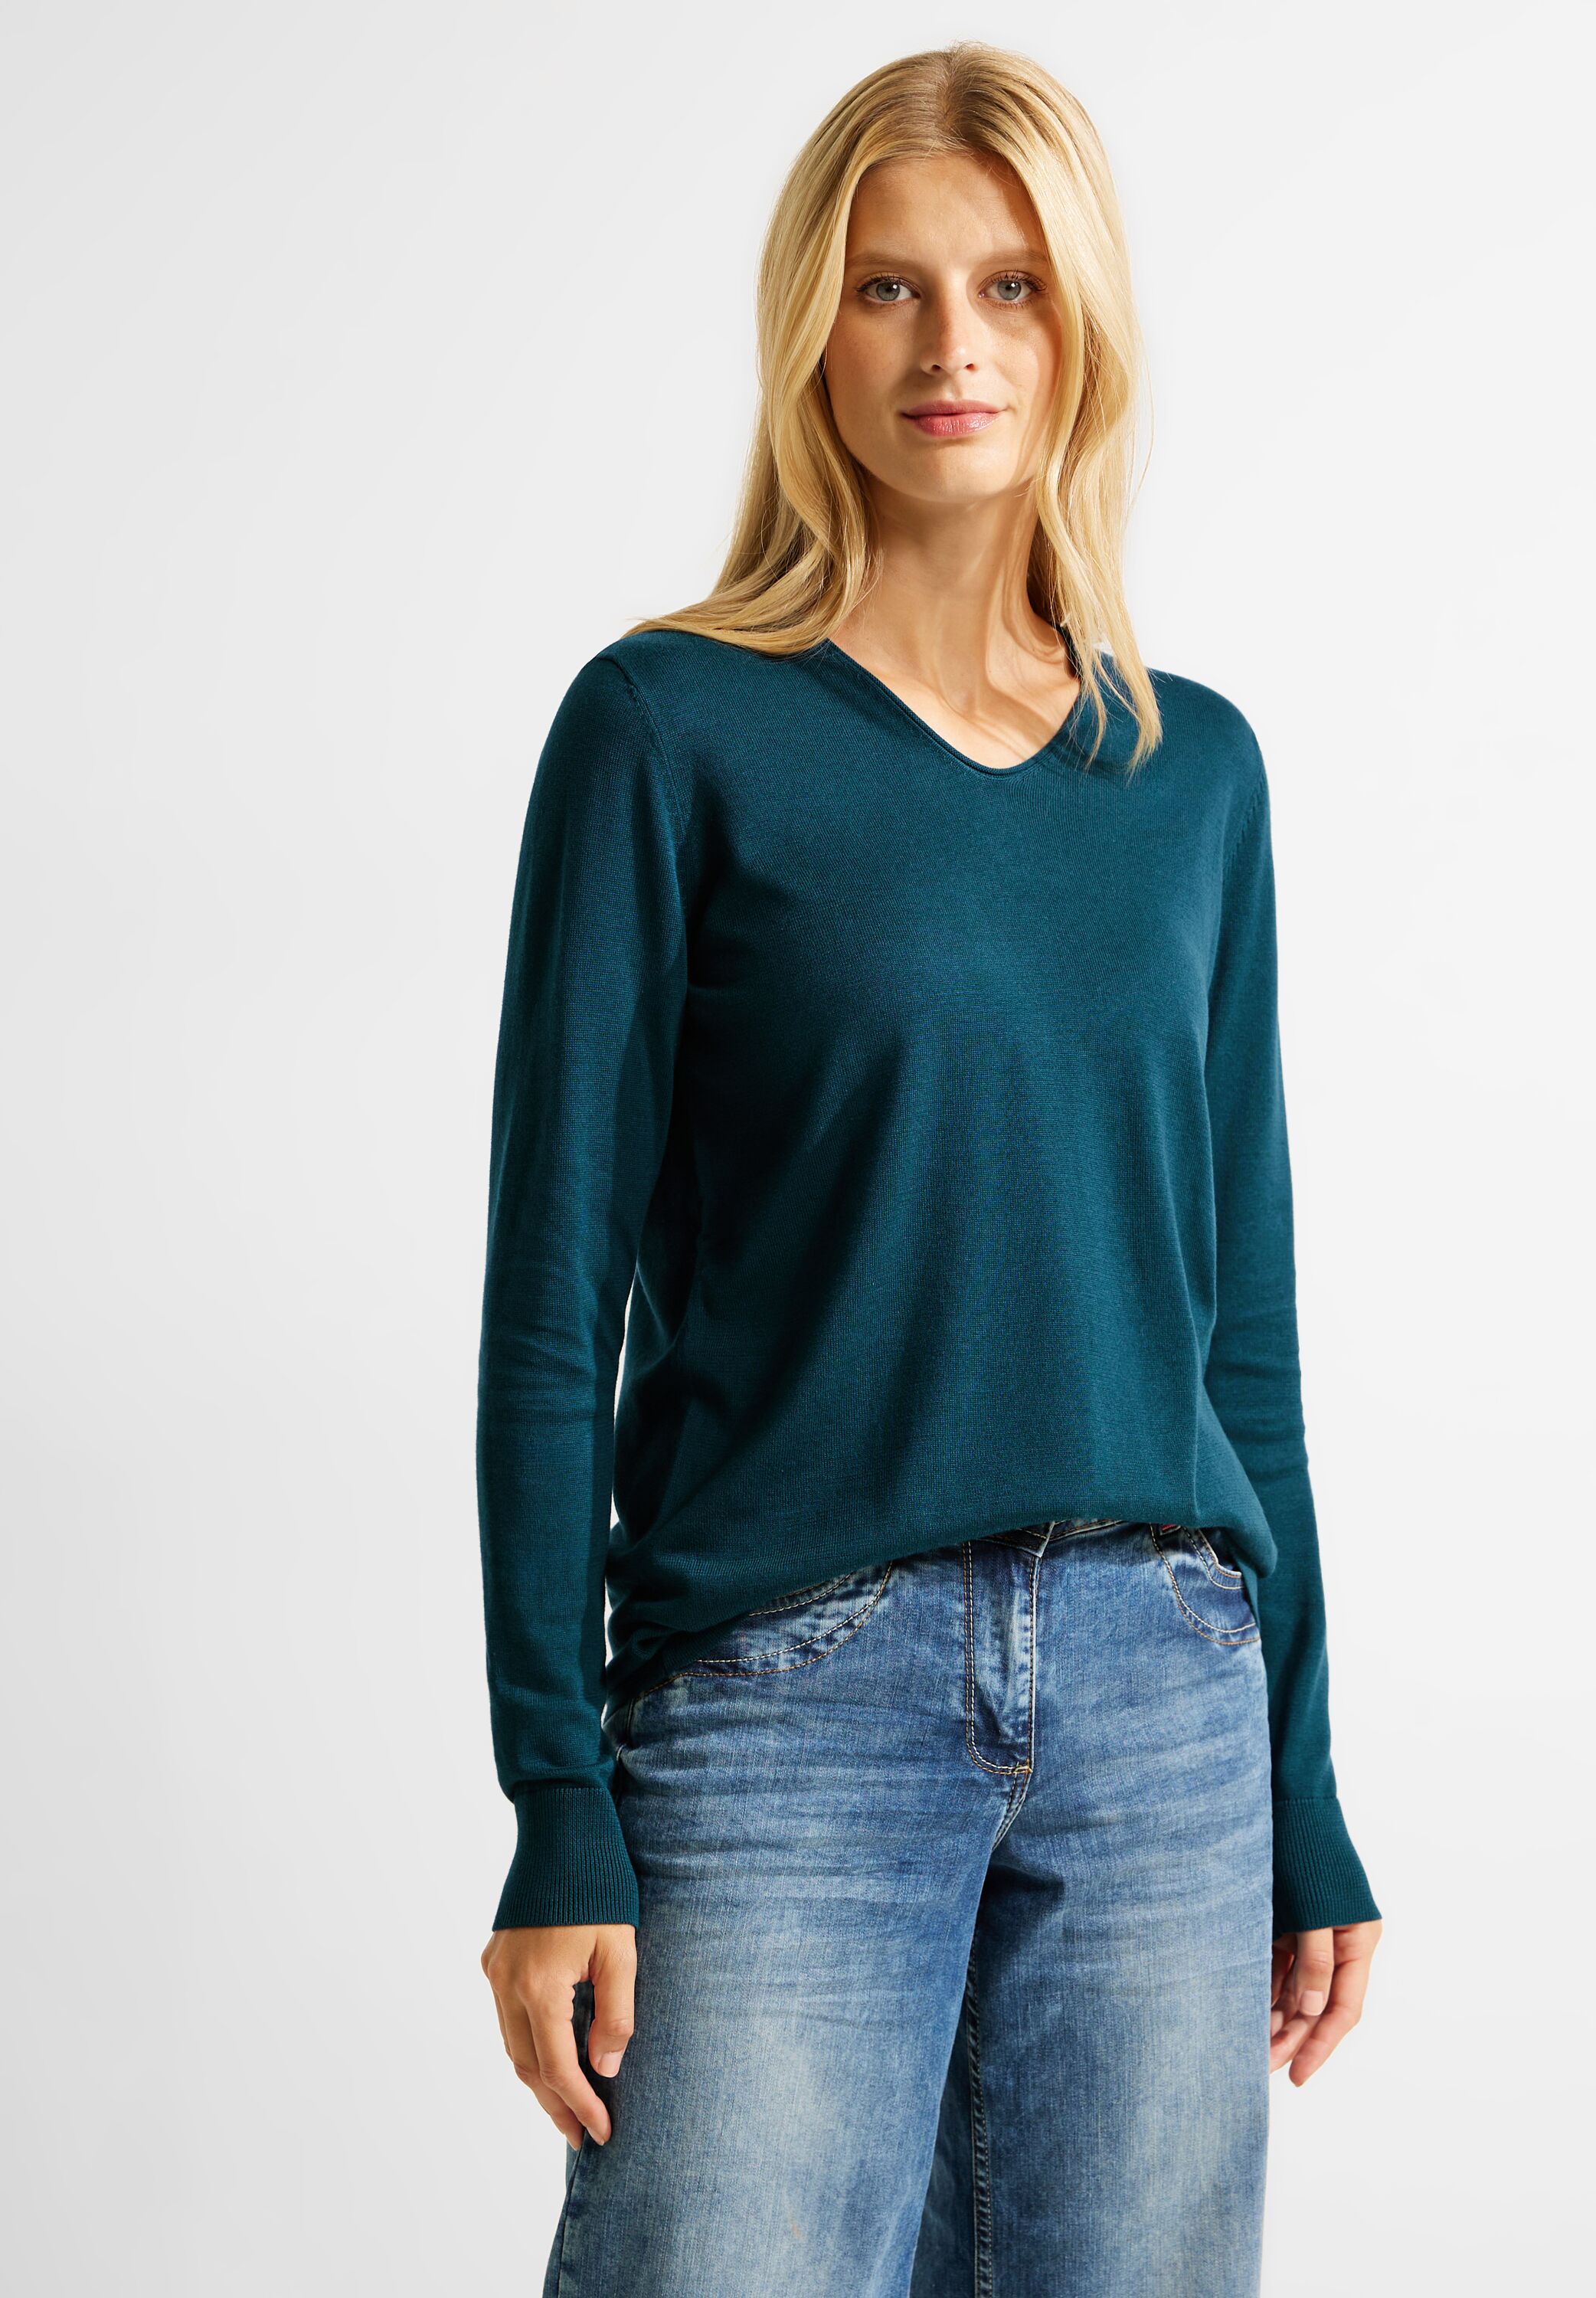 Pullover - Lake Green Deep B302342-14926 CECIL in CONCEPT Mode